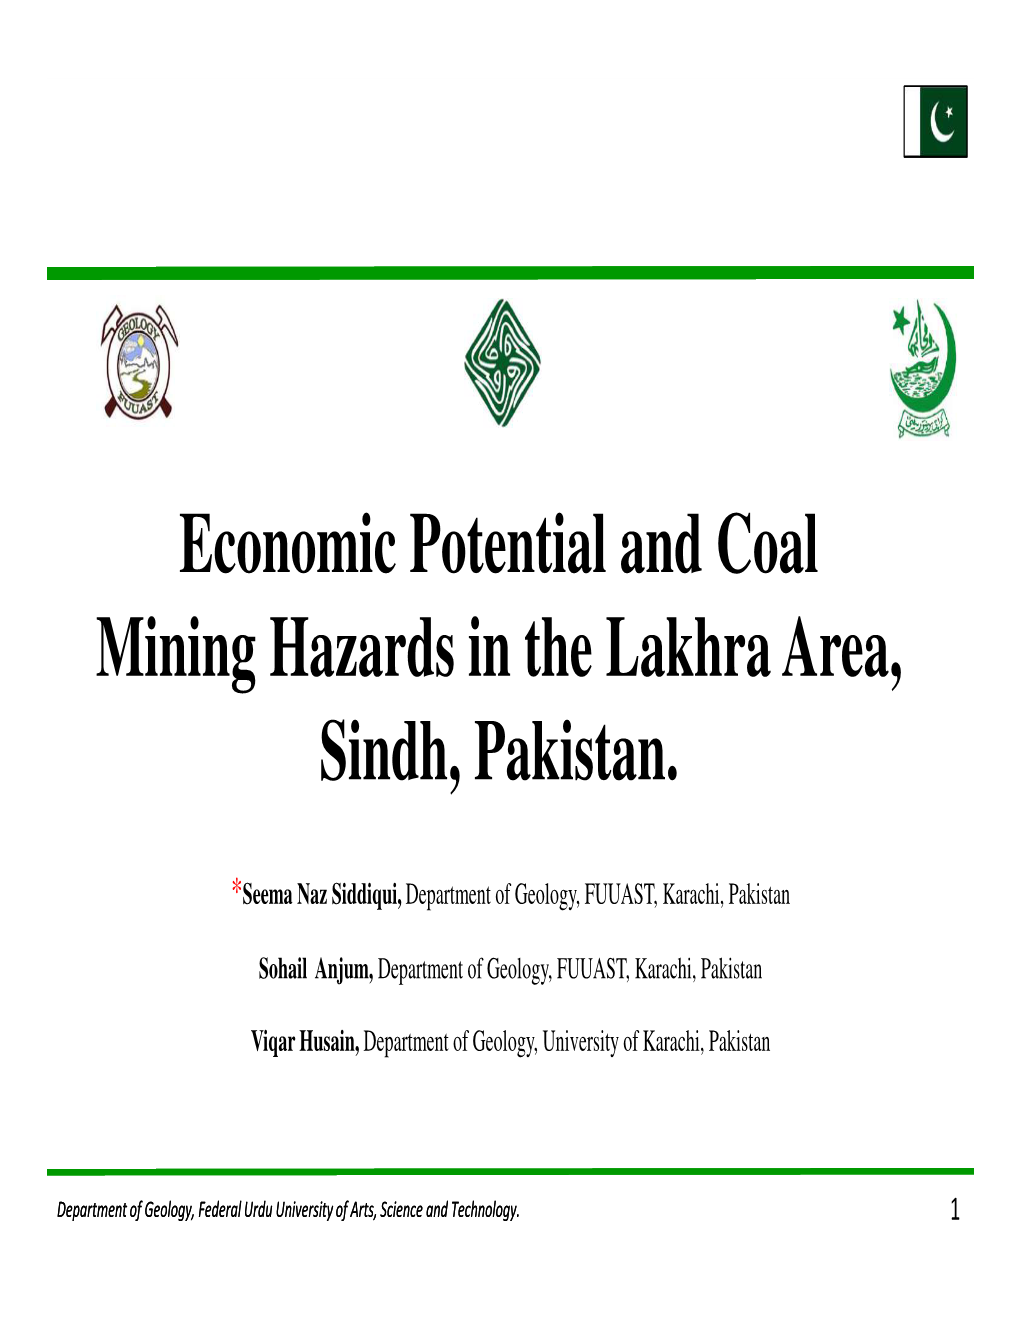 Economic Potential and Coal Mining Hazards in the Lakhra Area, Sindh, Pakistan